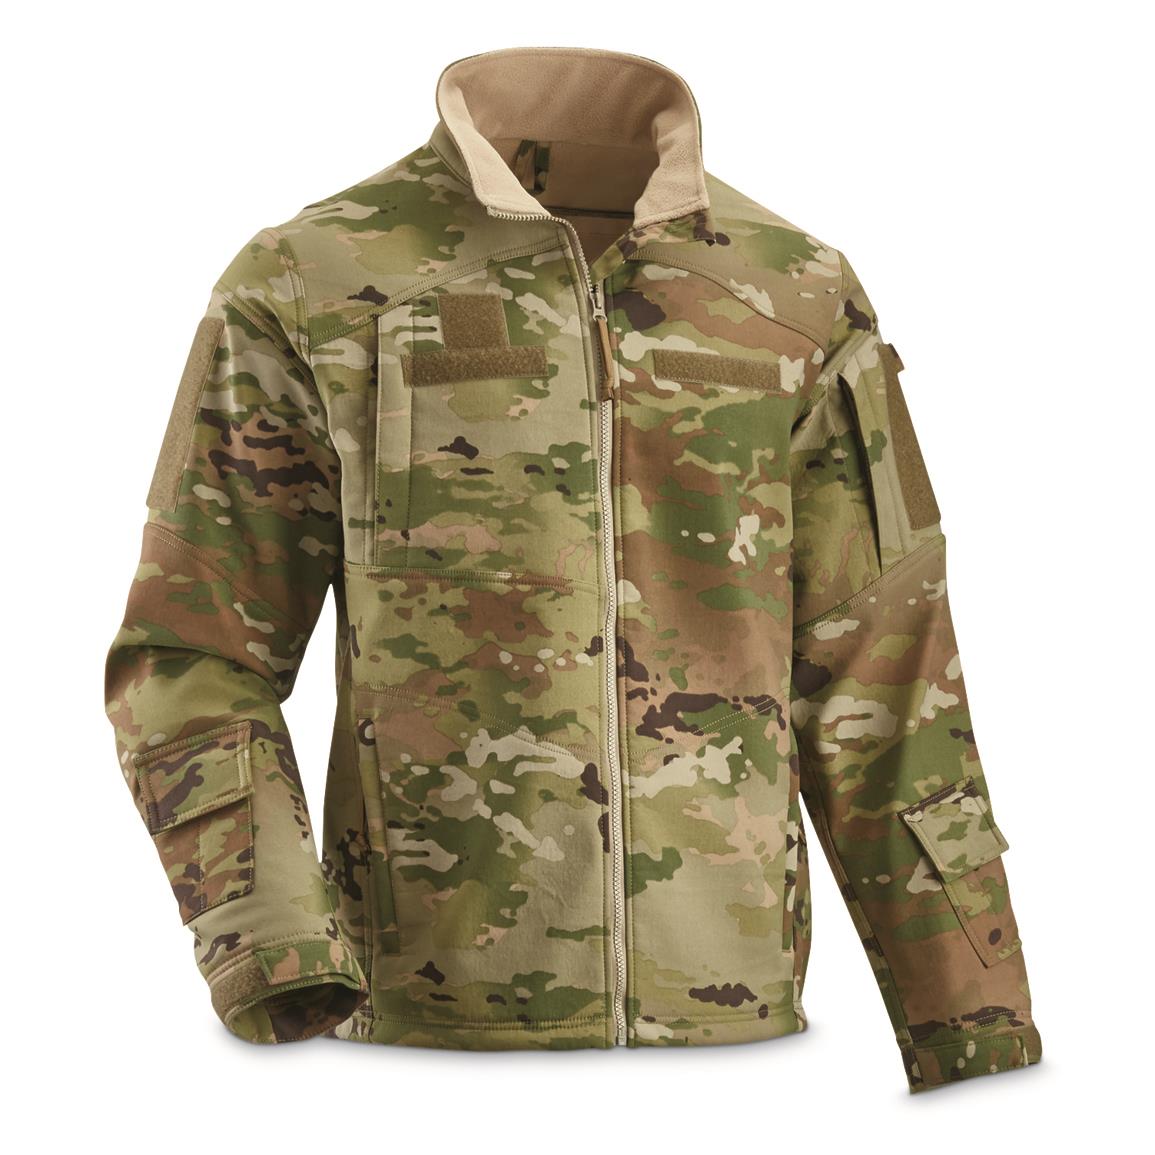 Brooklyn Armed Forces Light Weather Crewman Jacket, Multicam OCP